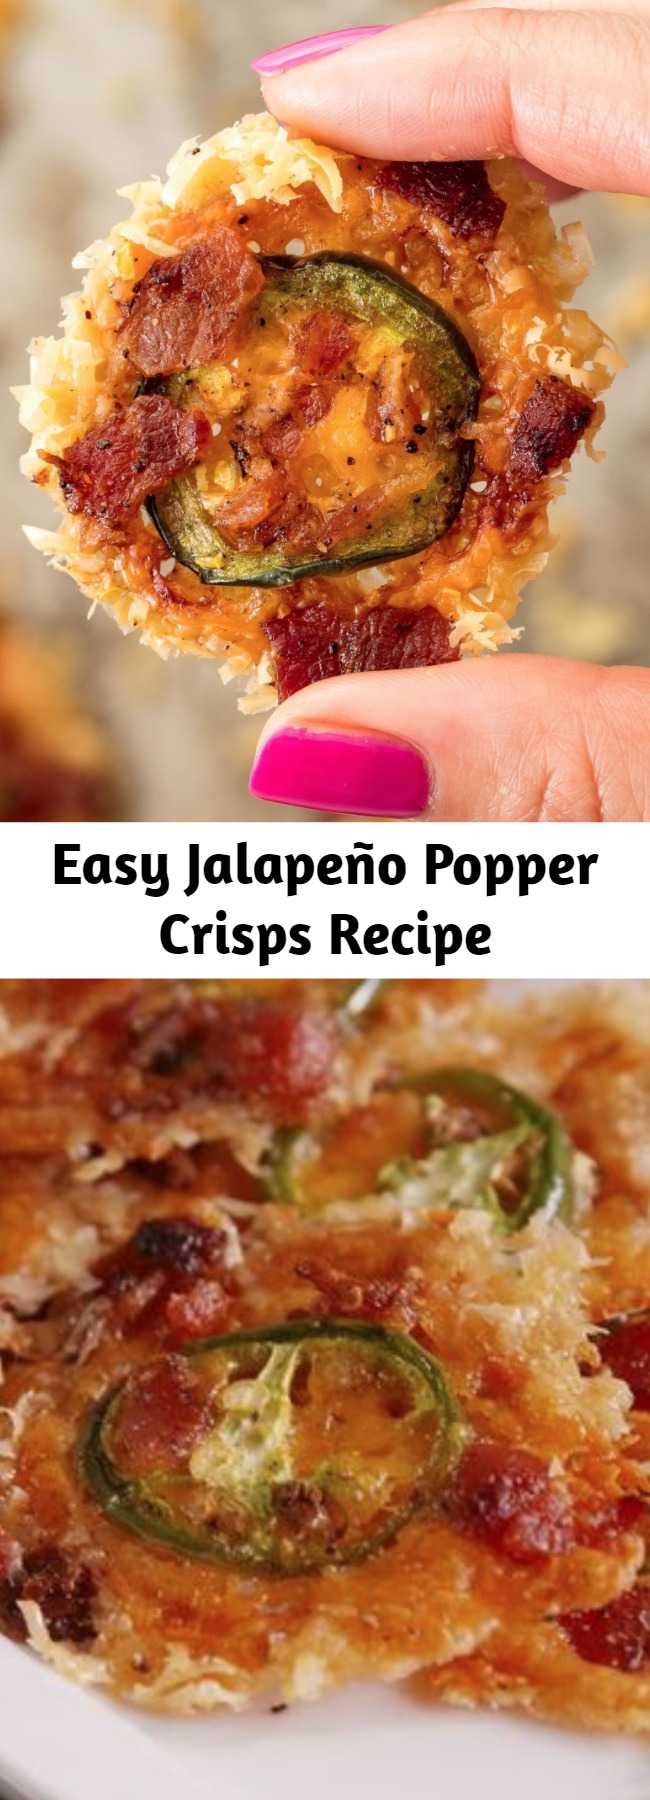 Easy Jalapeño Popper Crisps Recipe - Our three favorite flavors: spicy, cheesy, and... bacon-y. #jalapeno #easy #recipe #popper #lowcarb #healthy #jalapenopopper #cheese #bacon #glutenfree